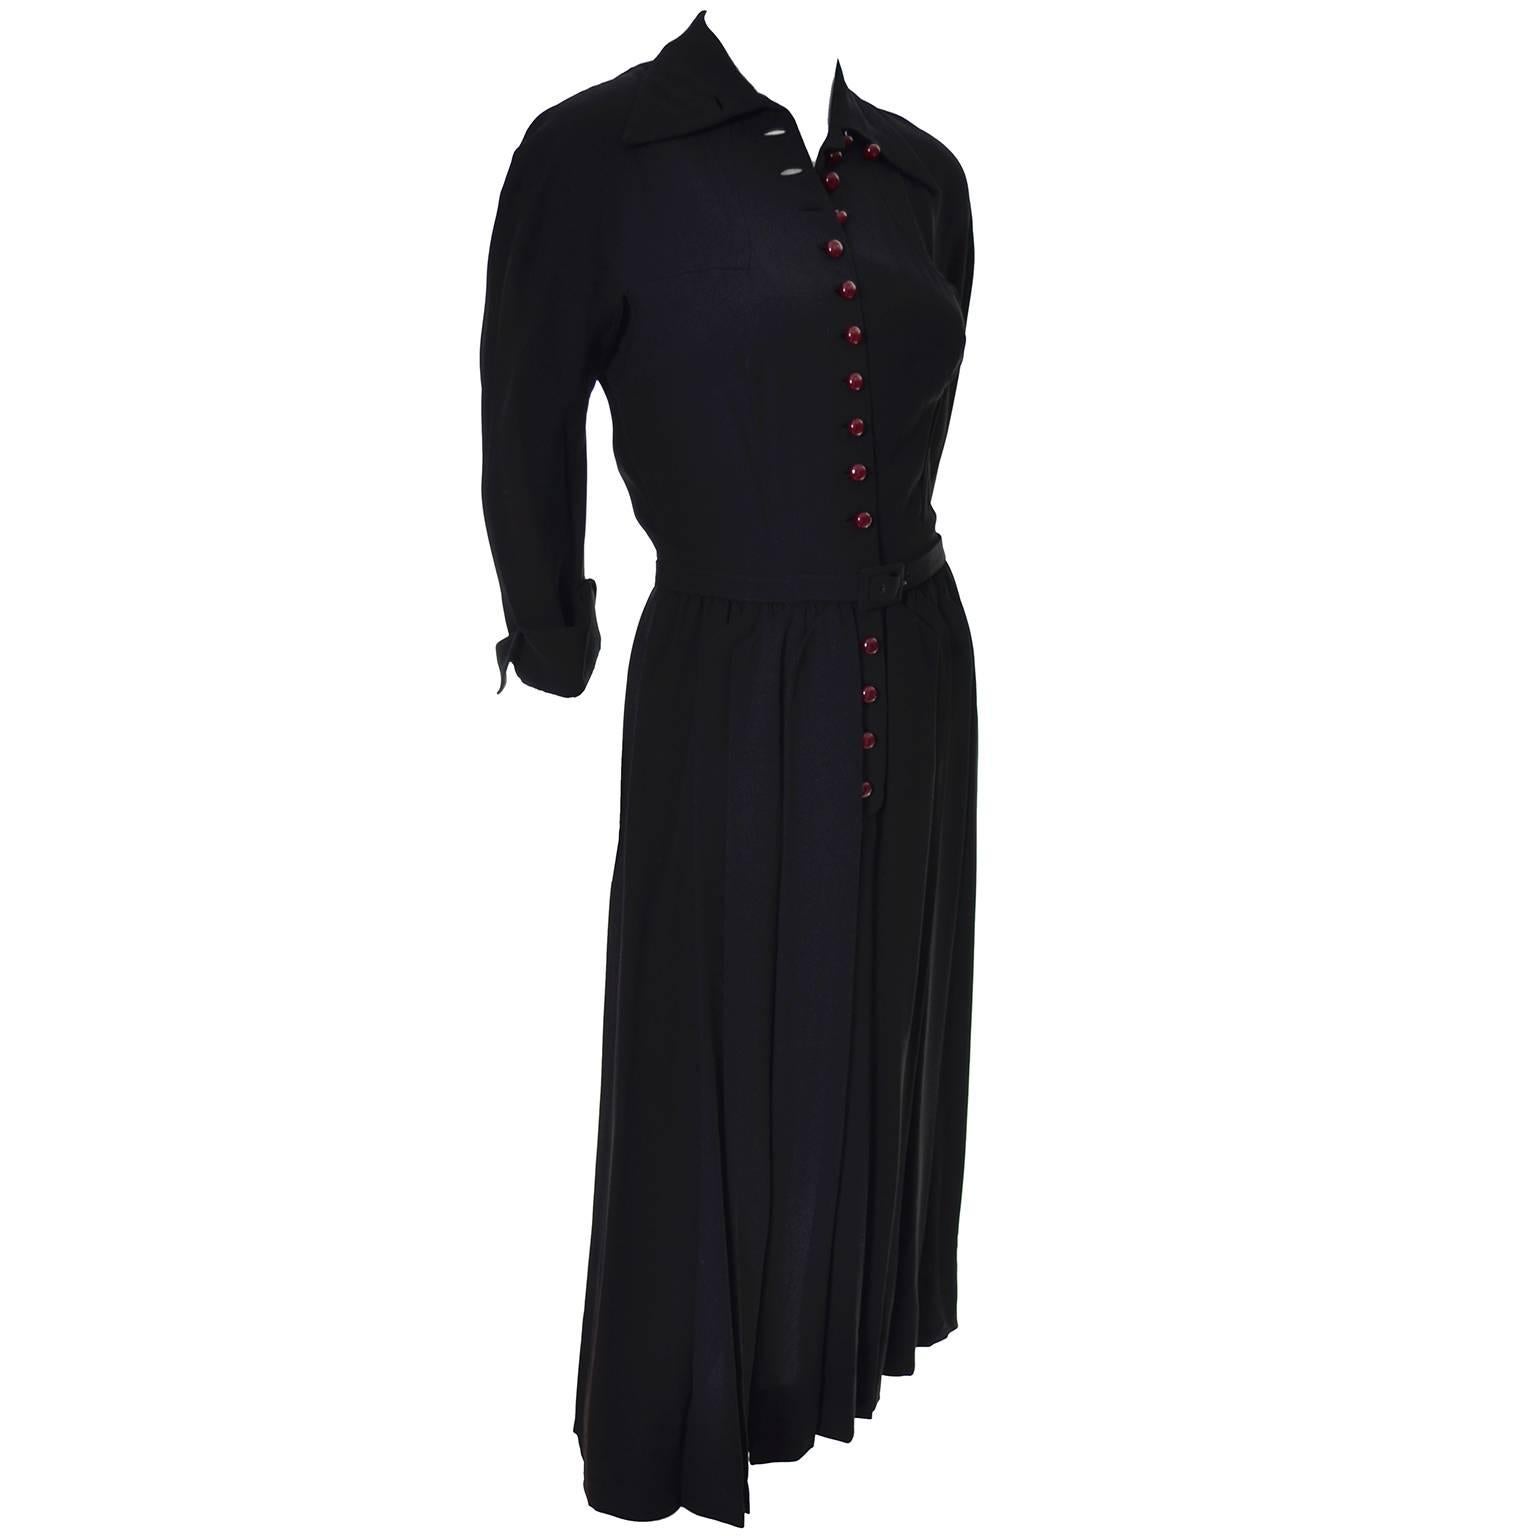 1940s Early Adele Simpson Vintage Rayon Crepe Dress With Unique Details